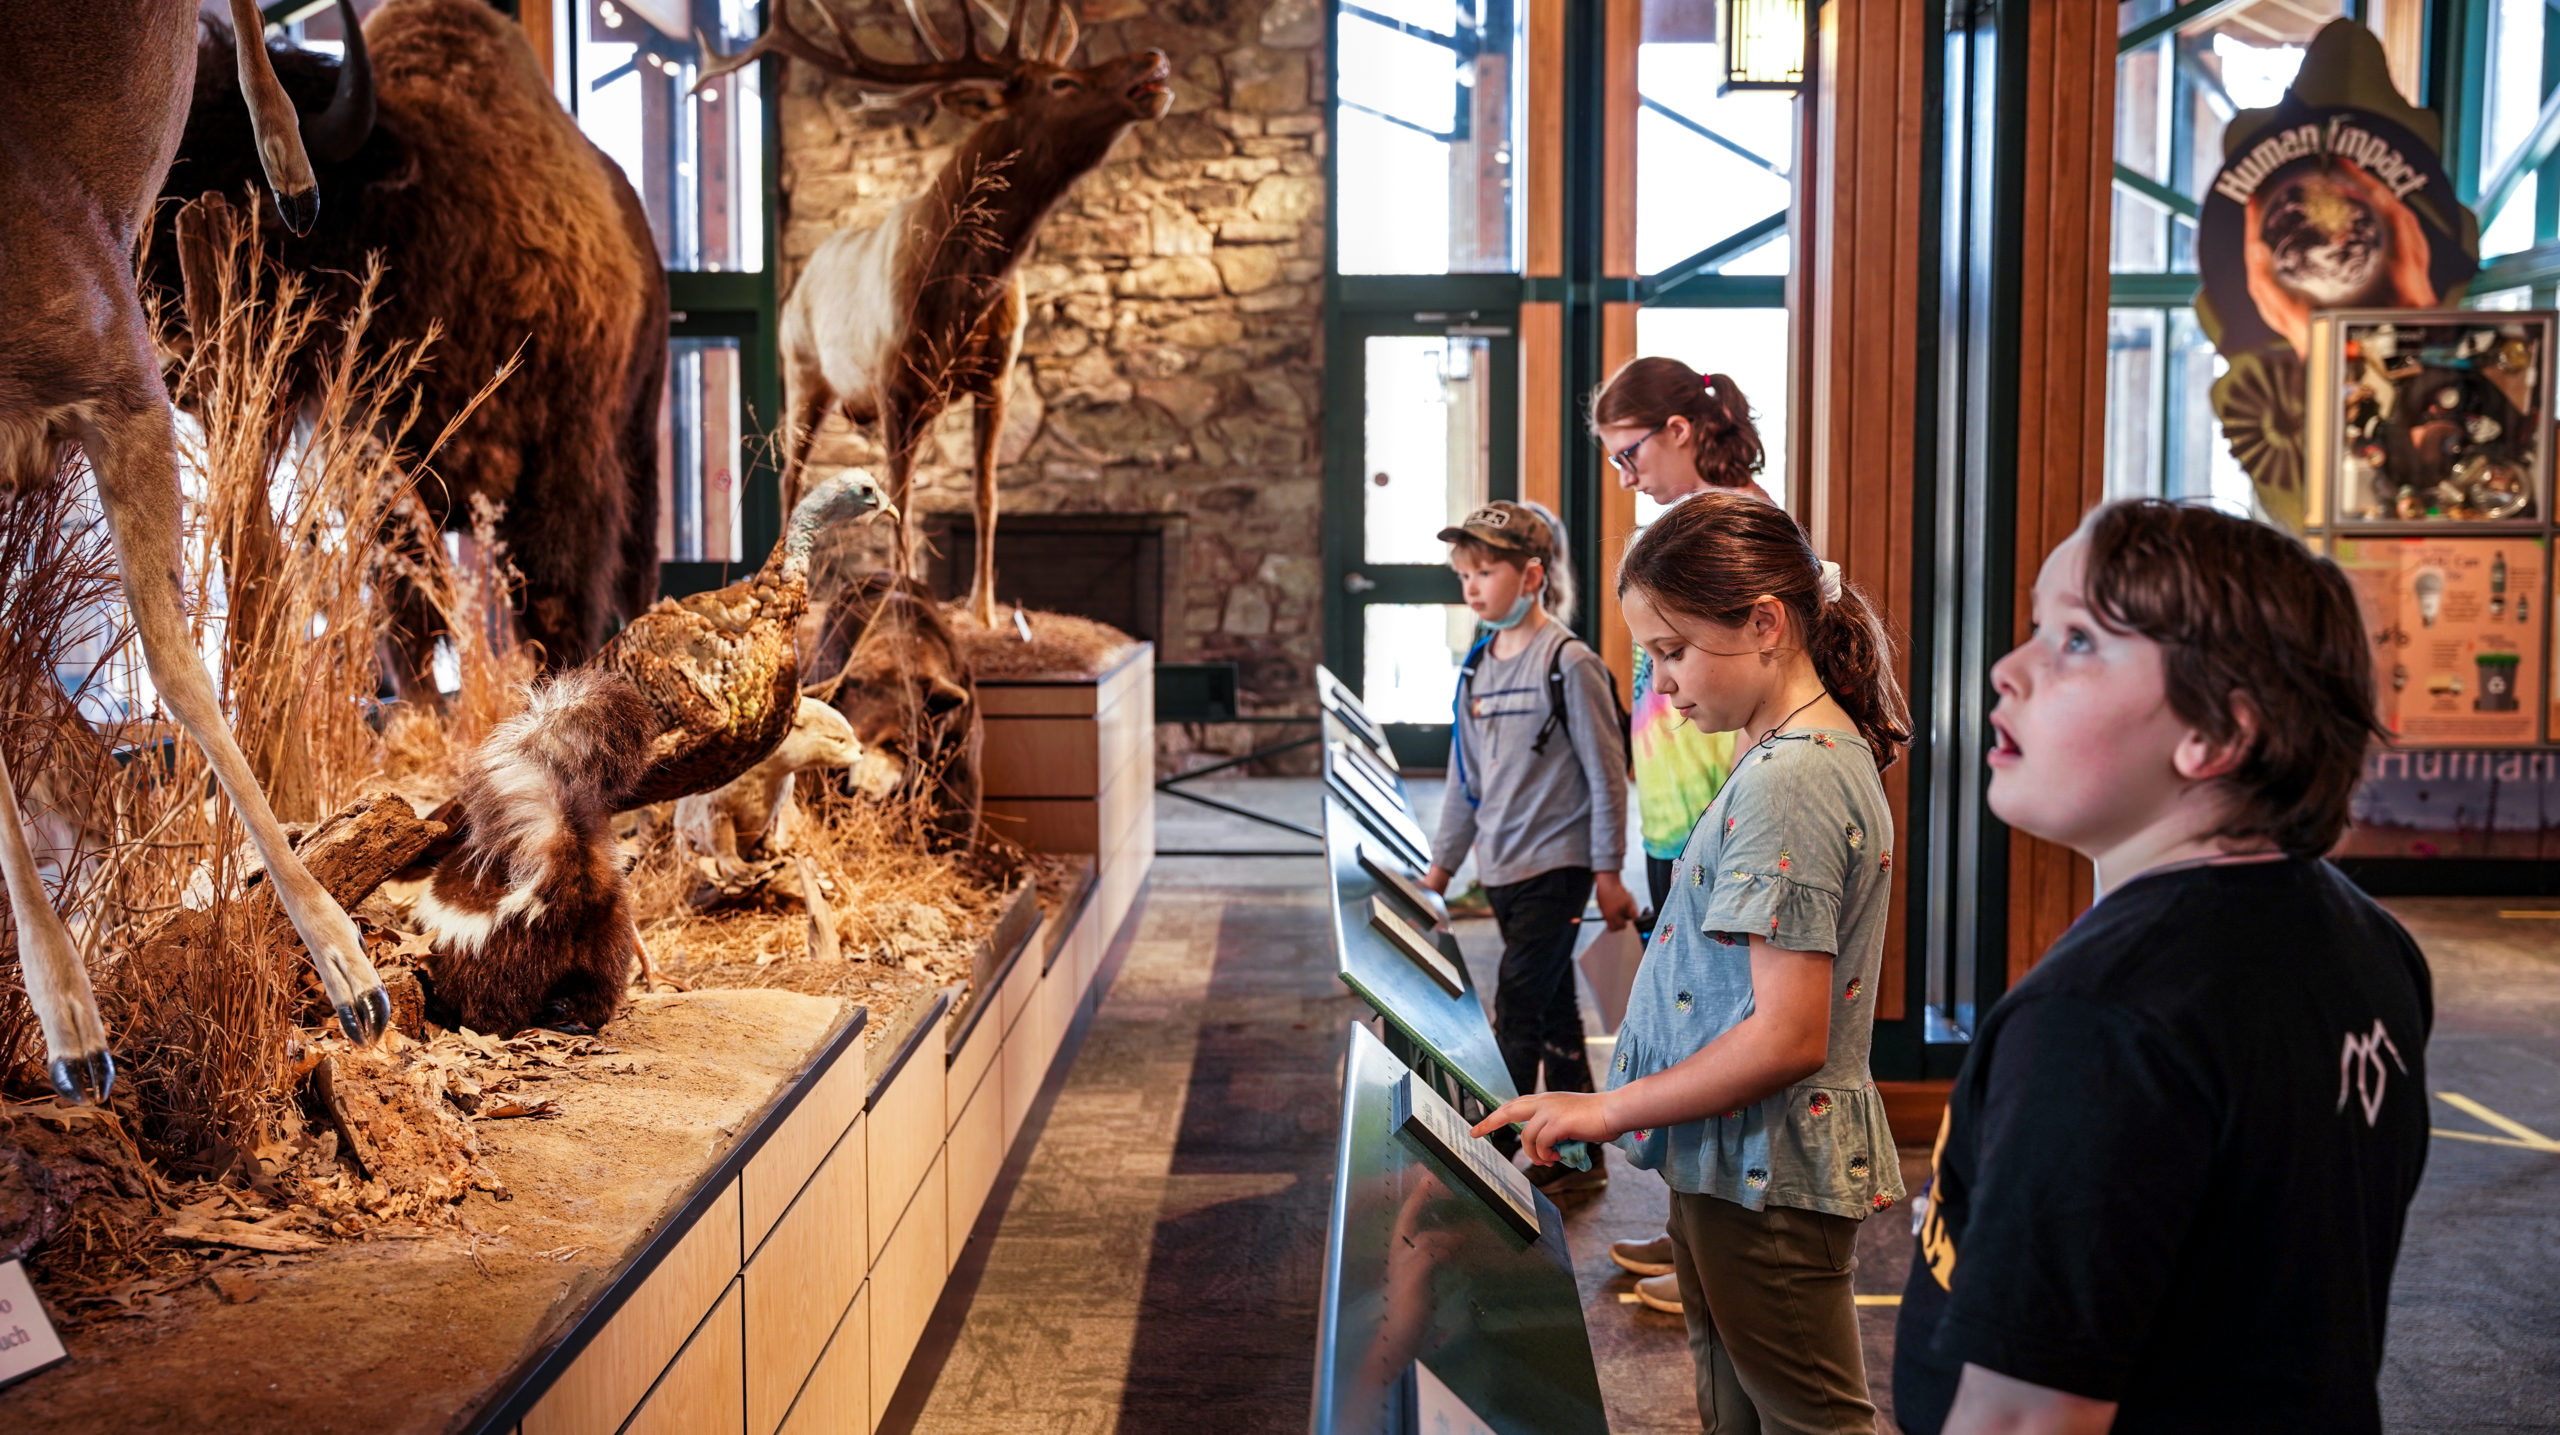 Marvel at a world of nature at the Lichterman Nature Center.